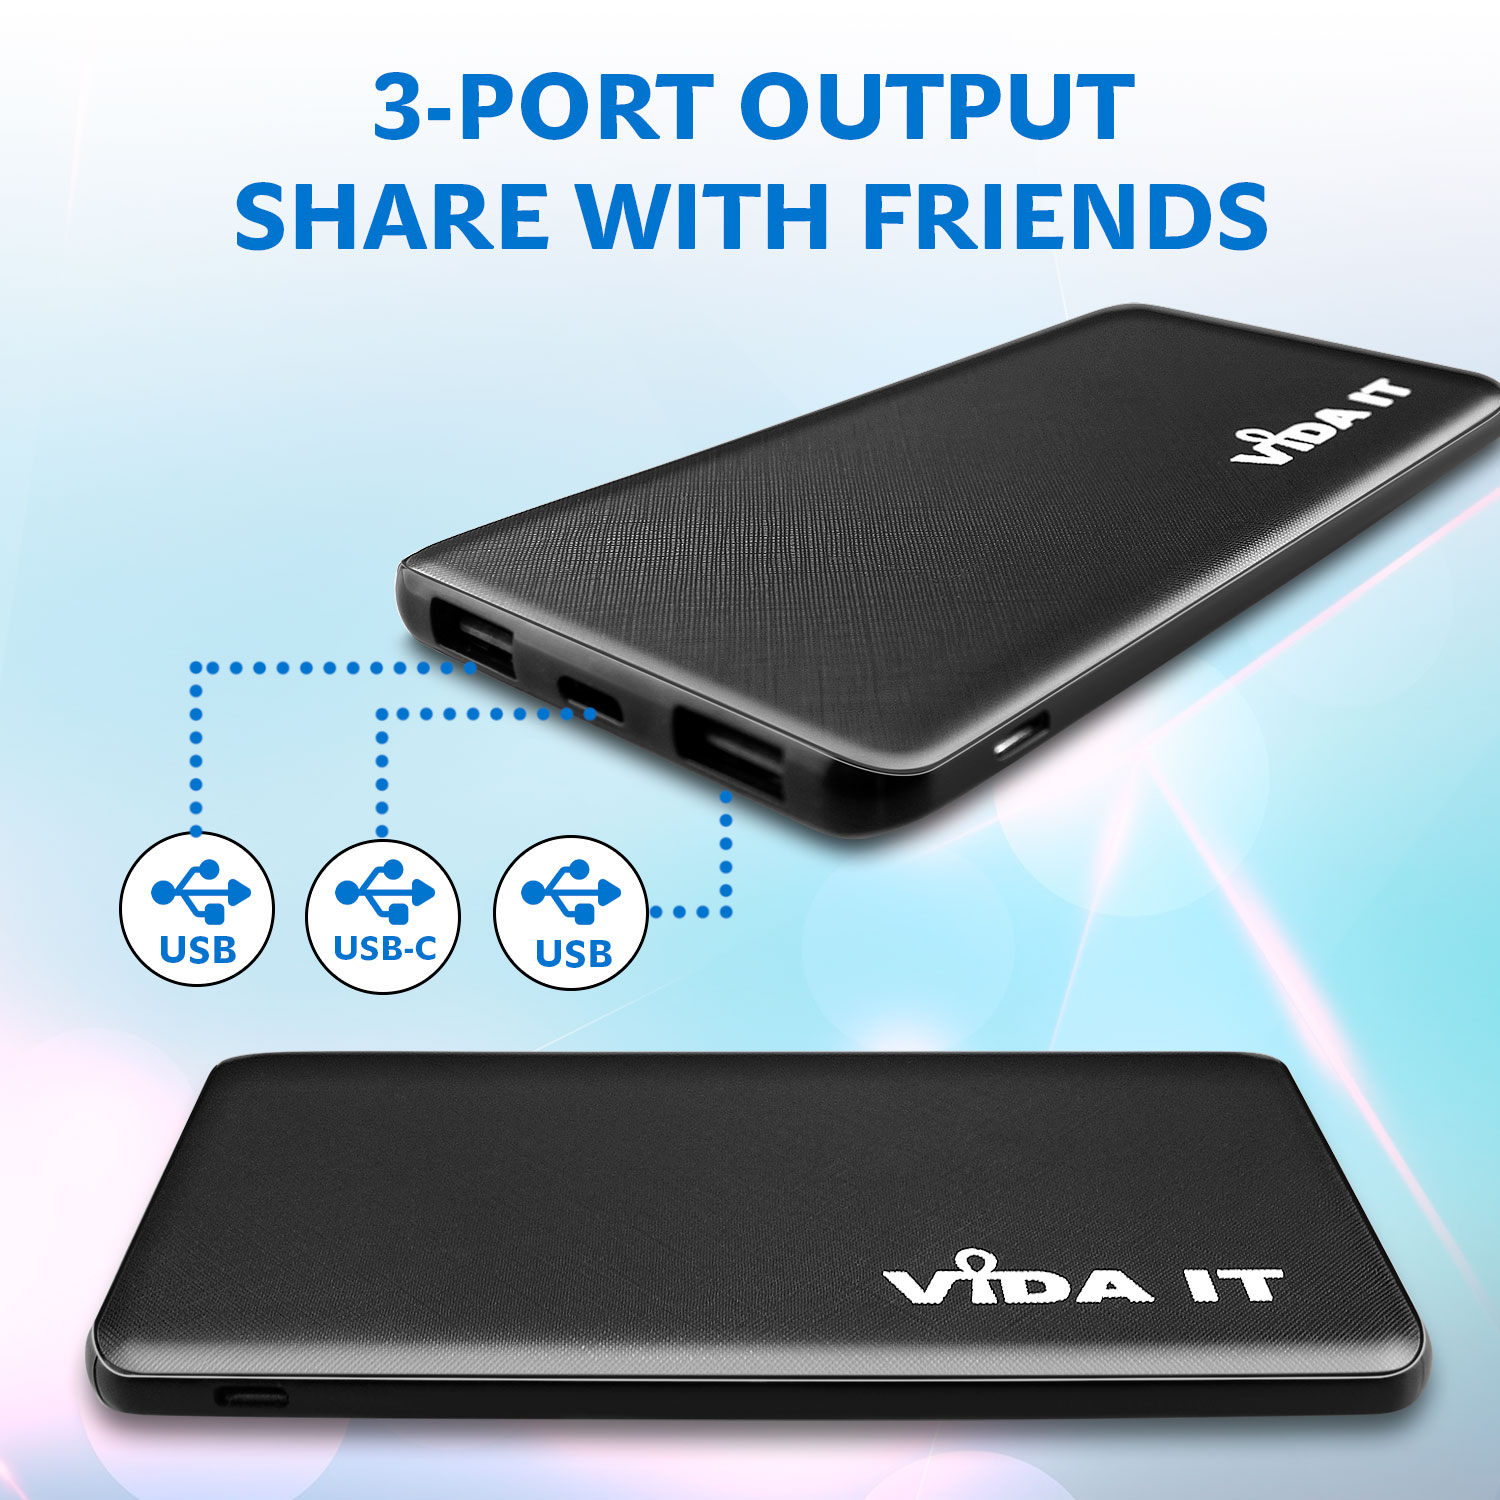 Vida IT V506 Lightweight 9mm Slim Design Travel Dual Port 5000mAh Power Bank Fast Charging 2A Portable External Emergency Battery Pack USB Charger in Black Colour with USB cable and Apple-Lightning and USB-C Adapters